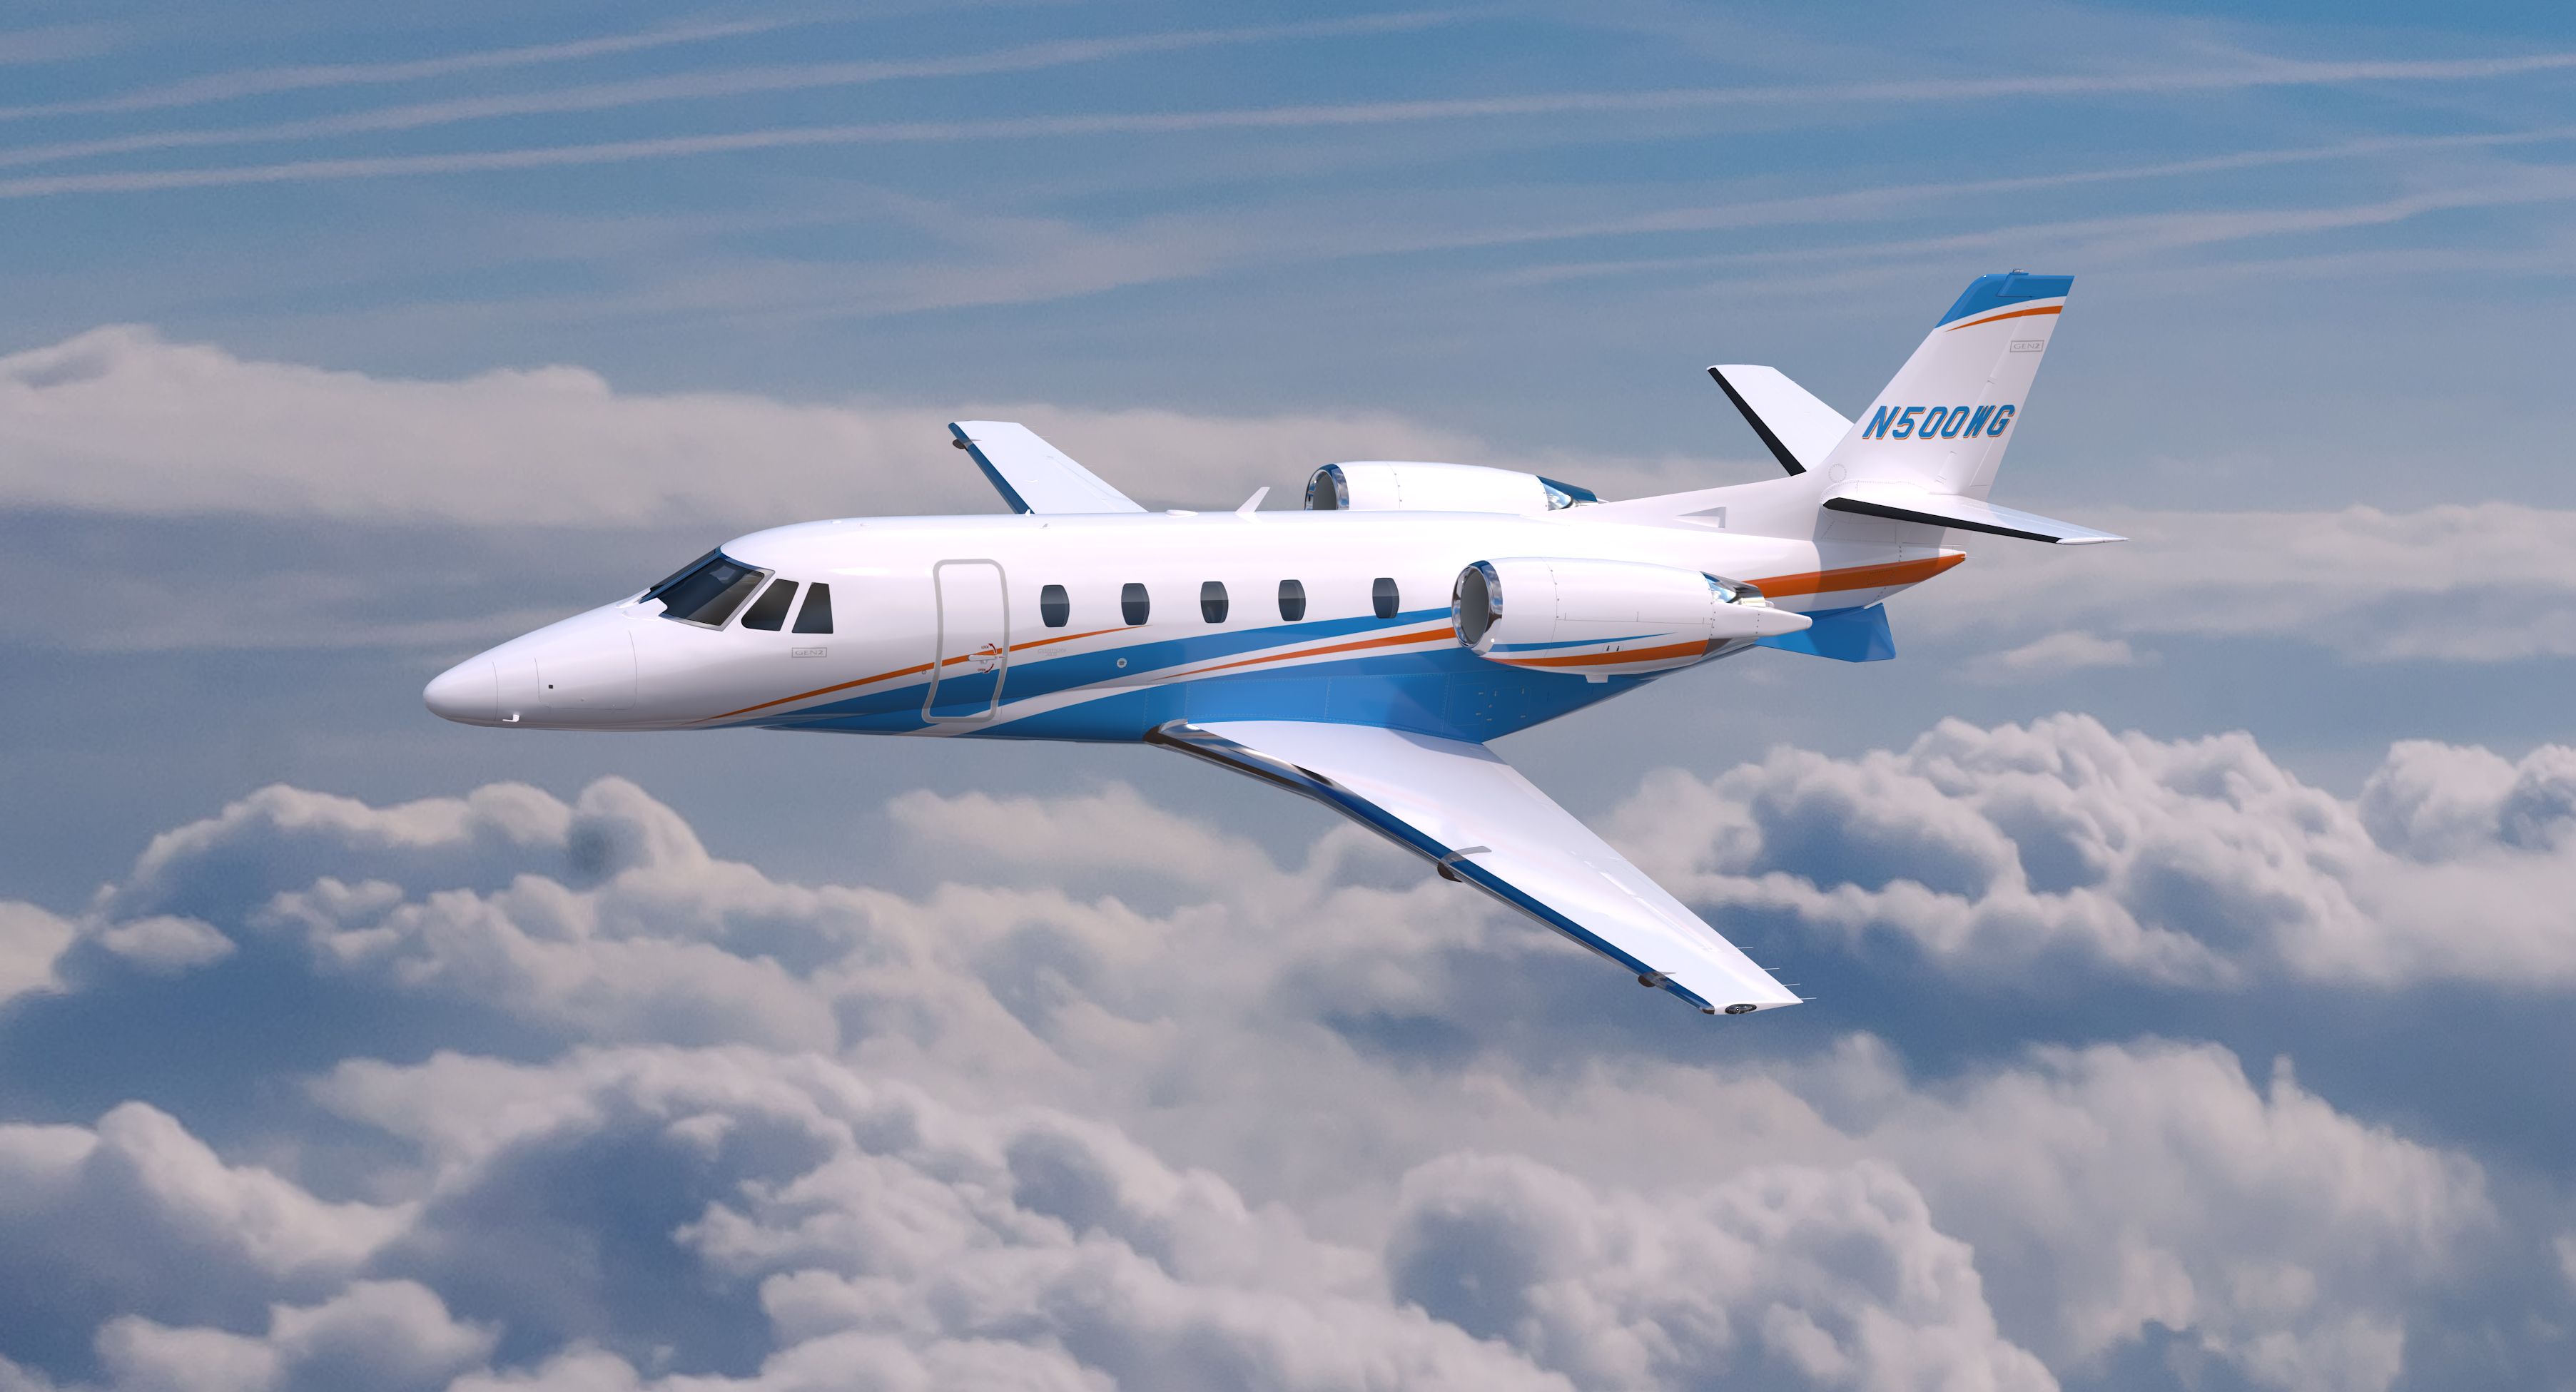 A Citation XLS flying above the clouds.